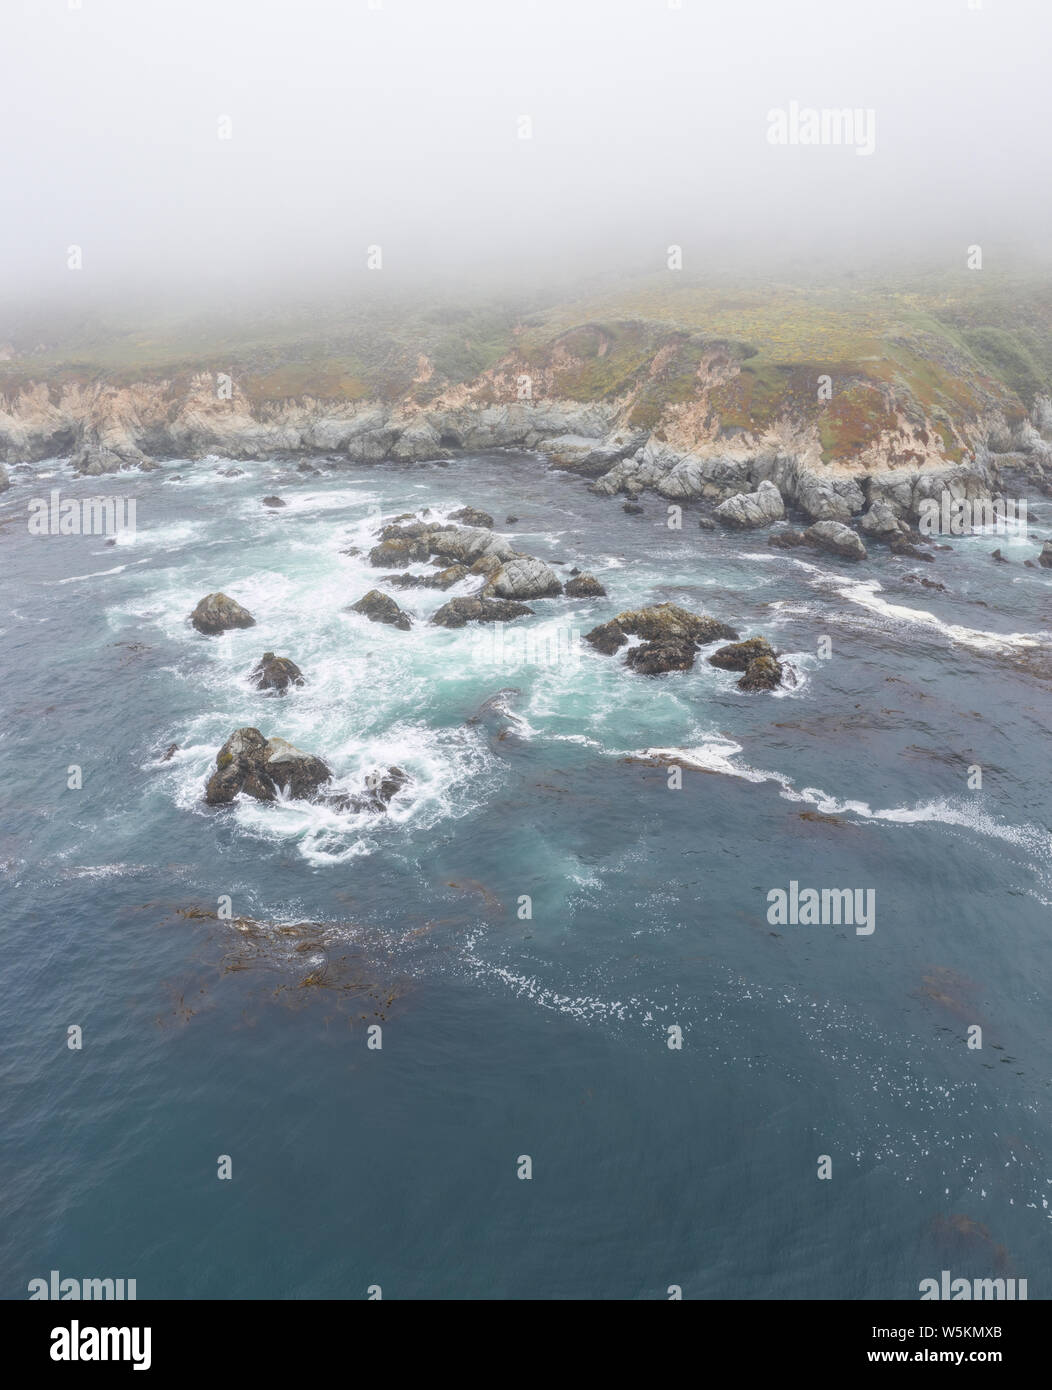 Seen from a bird's eye view, the cold waters of the Pacific Ocean wash against the rocky yet beautiful coast south of Monterey in Northern California. Stock Photo